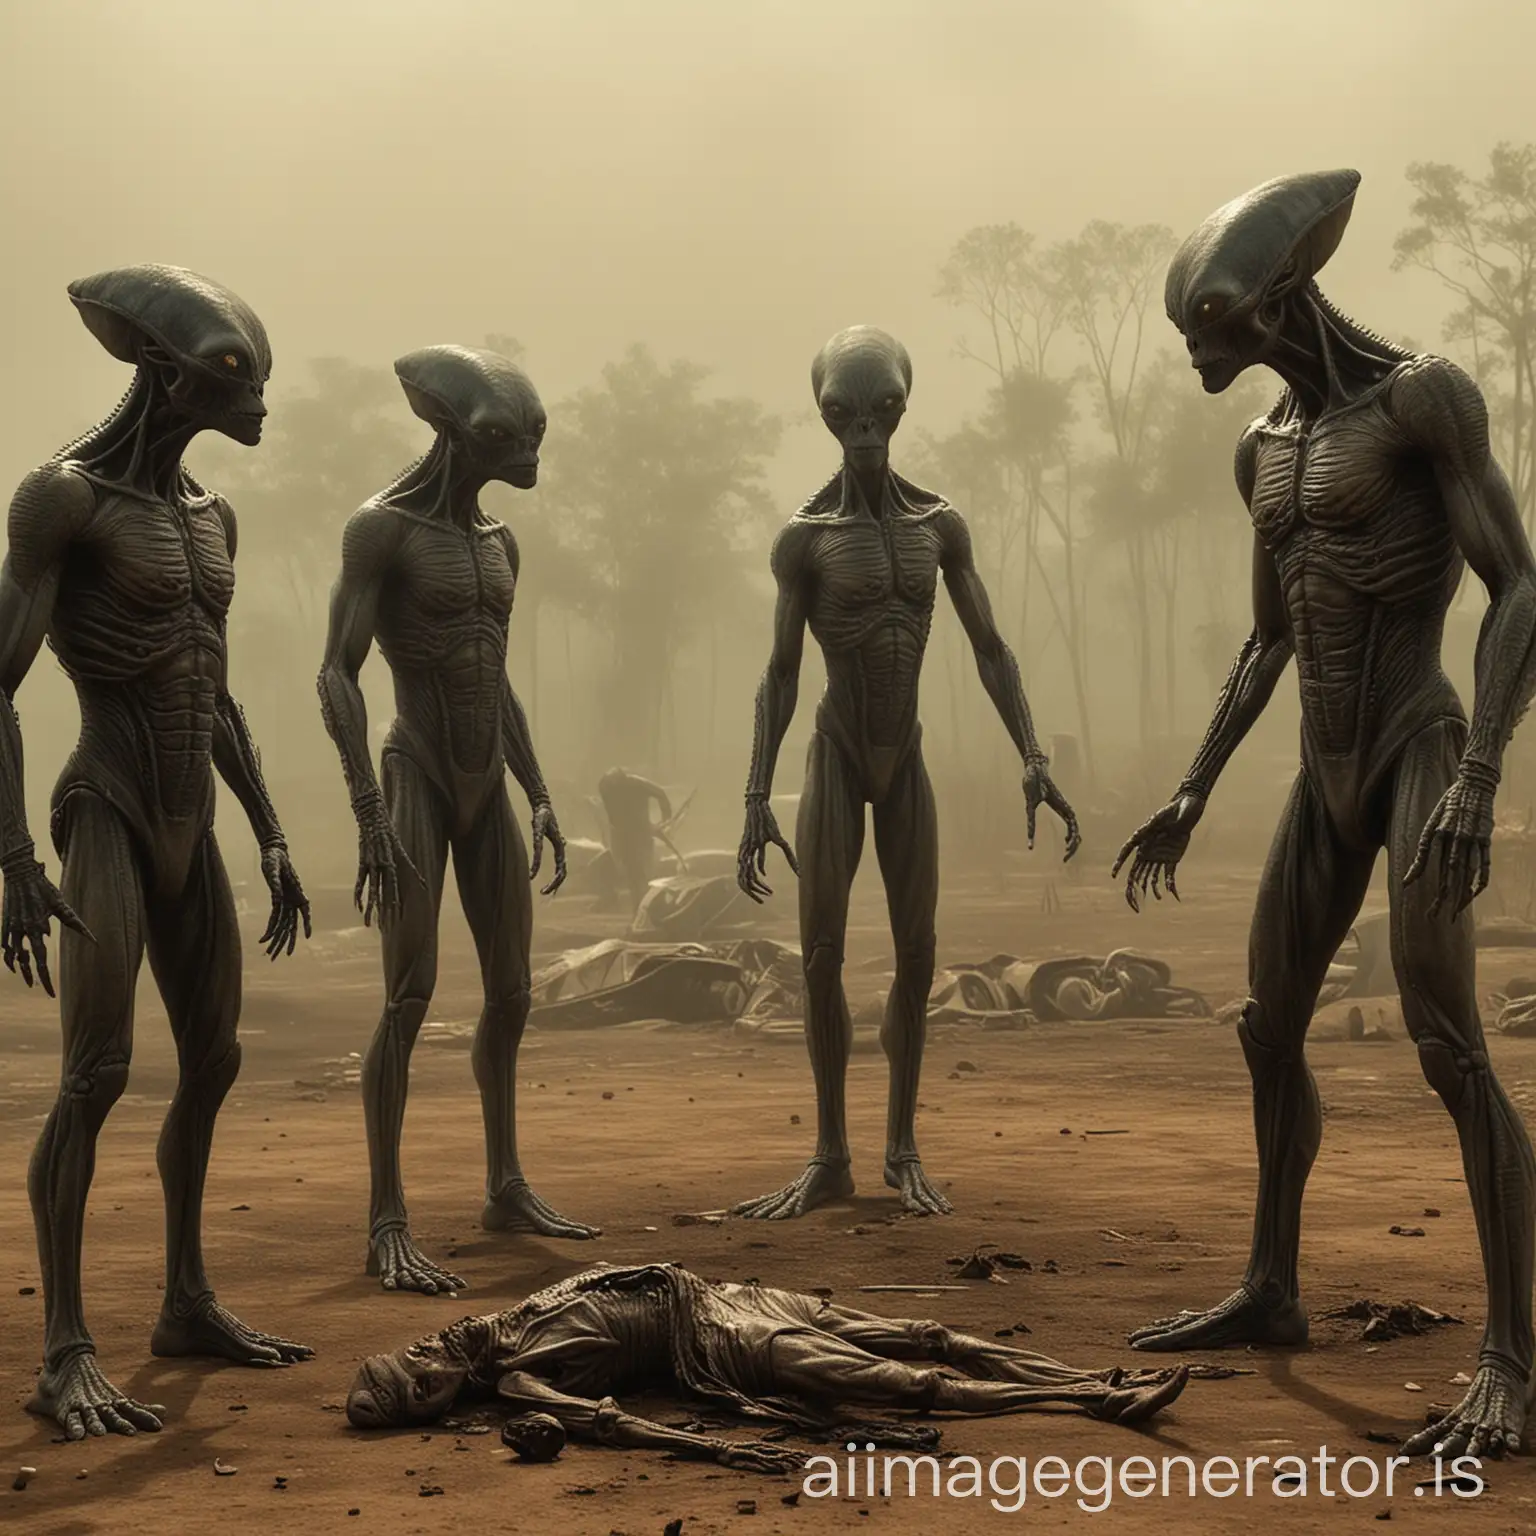 4 aliens sacrificing 1 aliens in the act of killing them